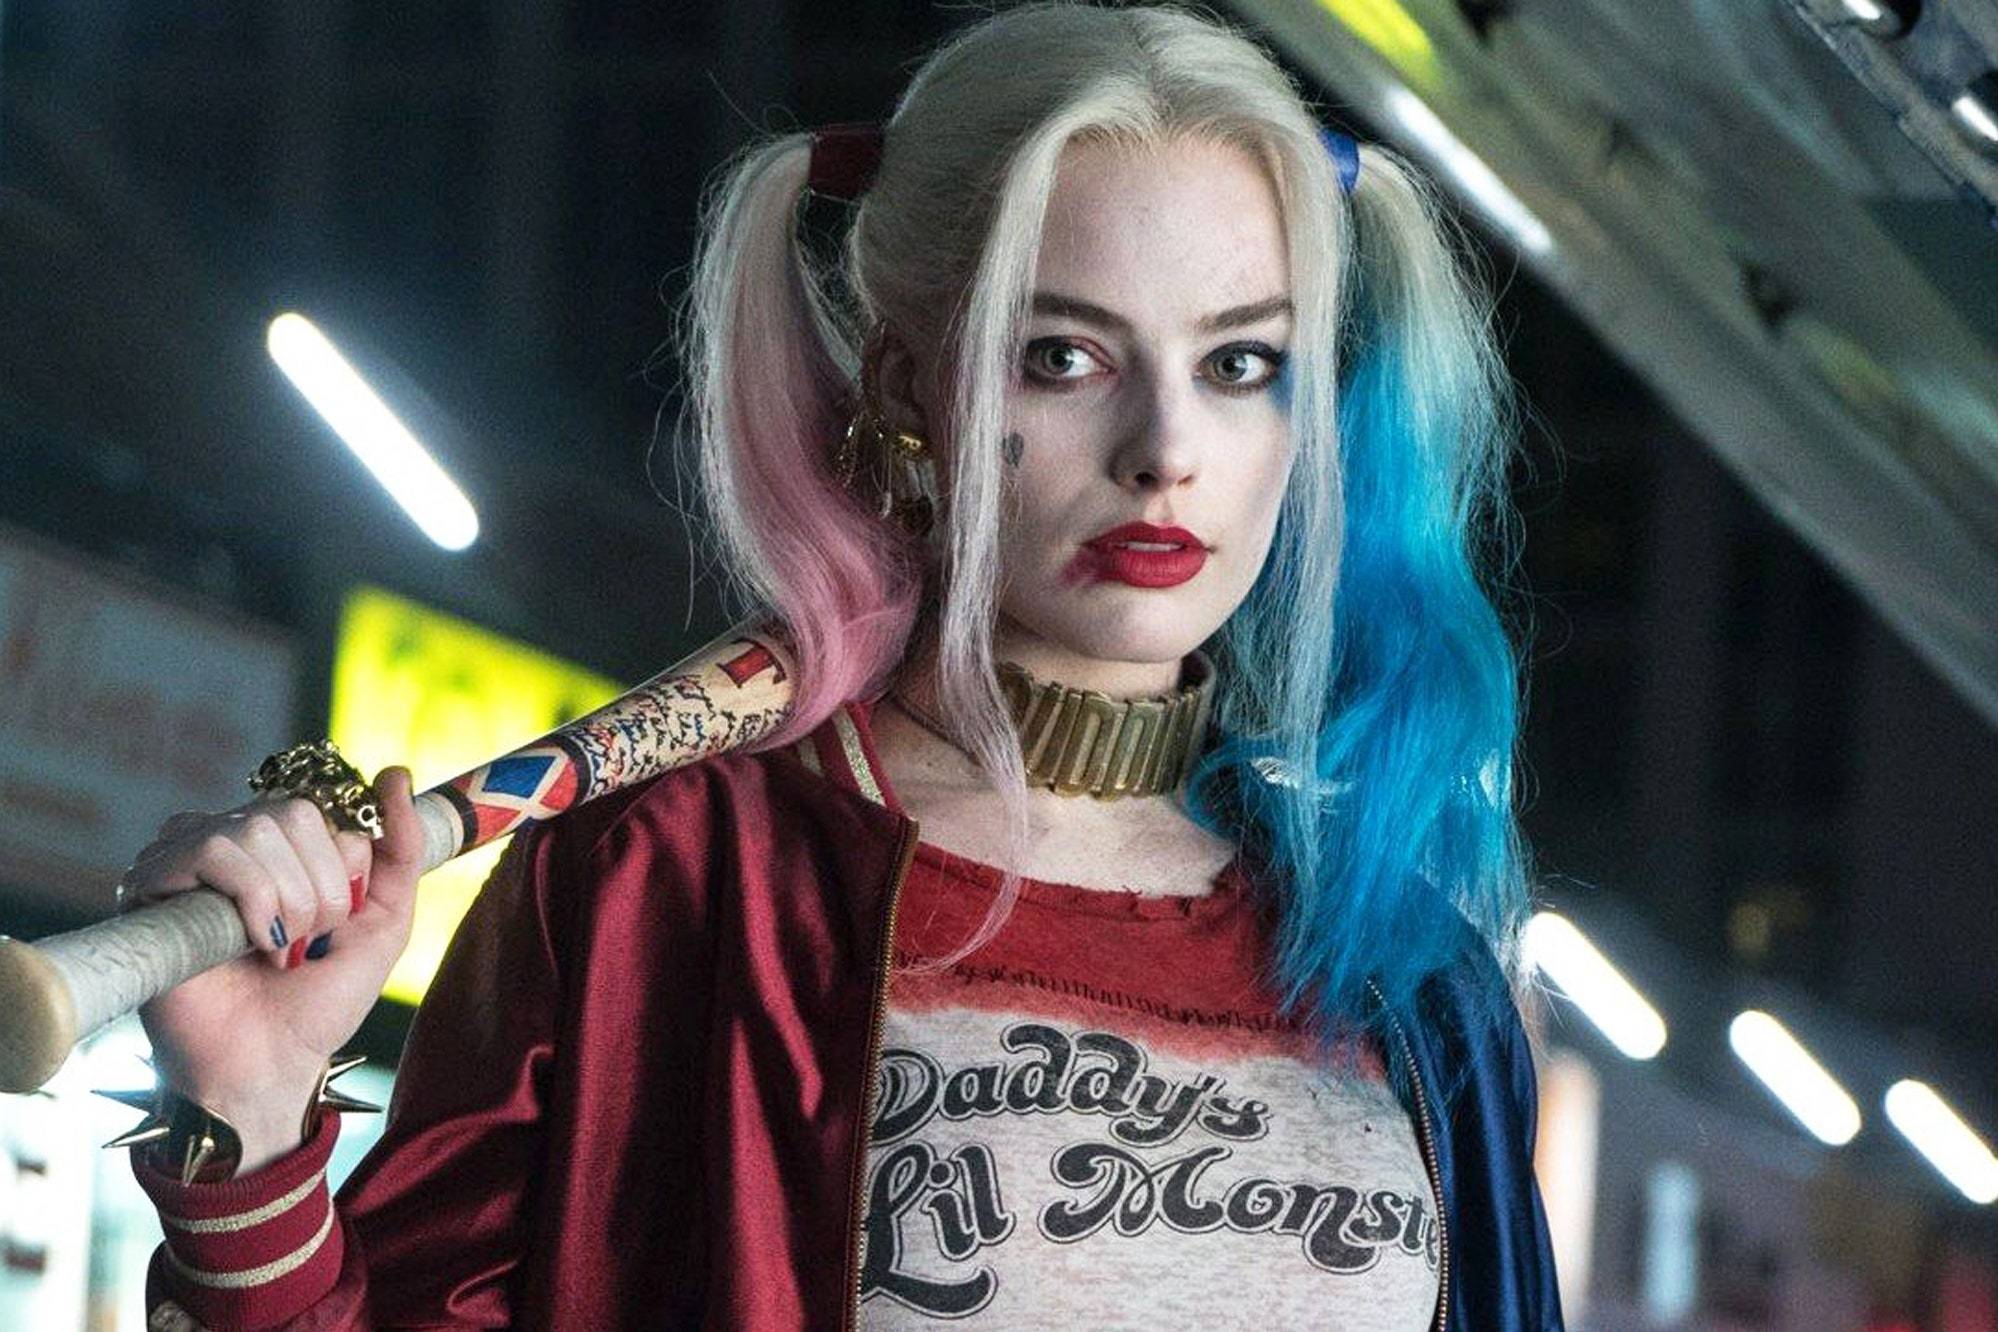 Harley Quinn cartoon book character in the form of a film - darren yaw released news